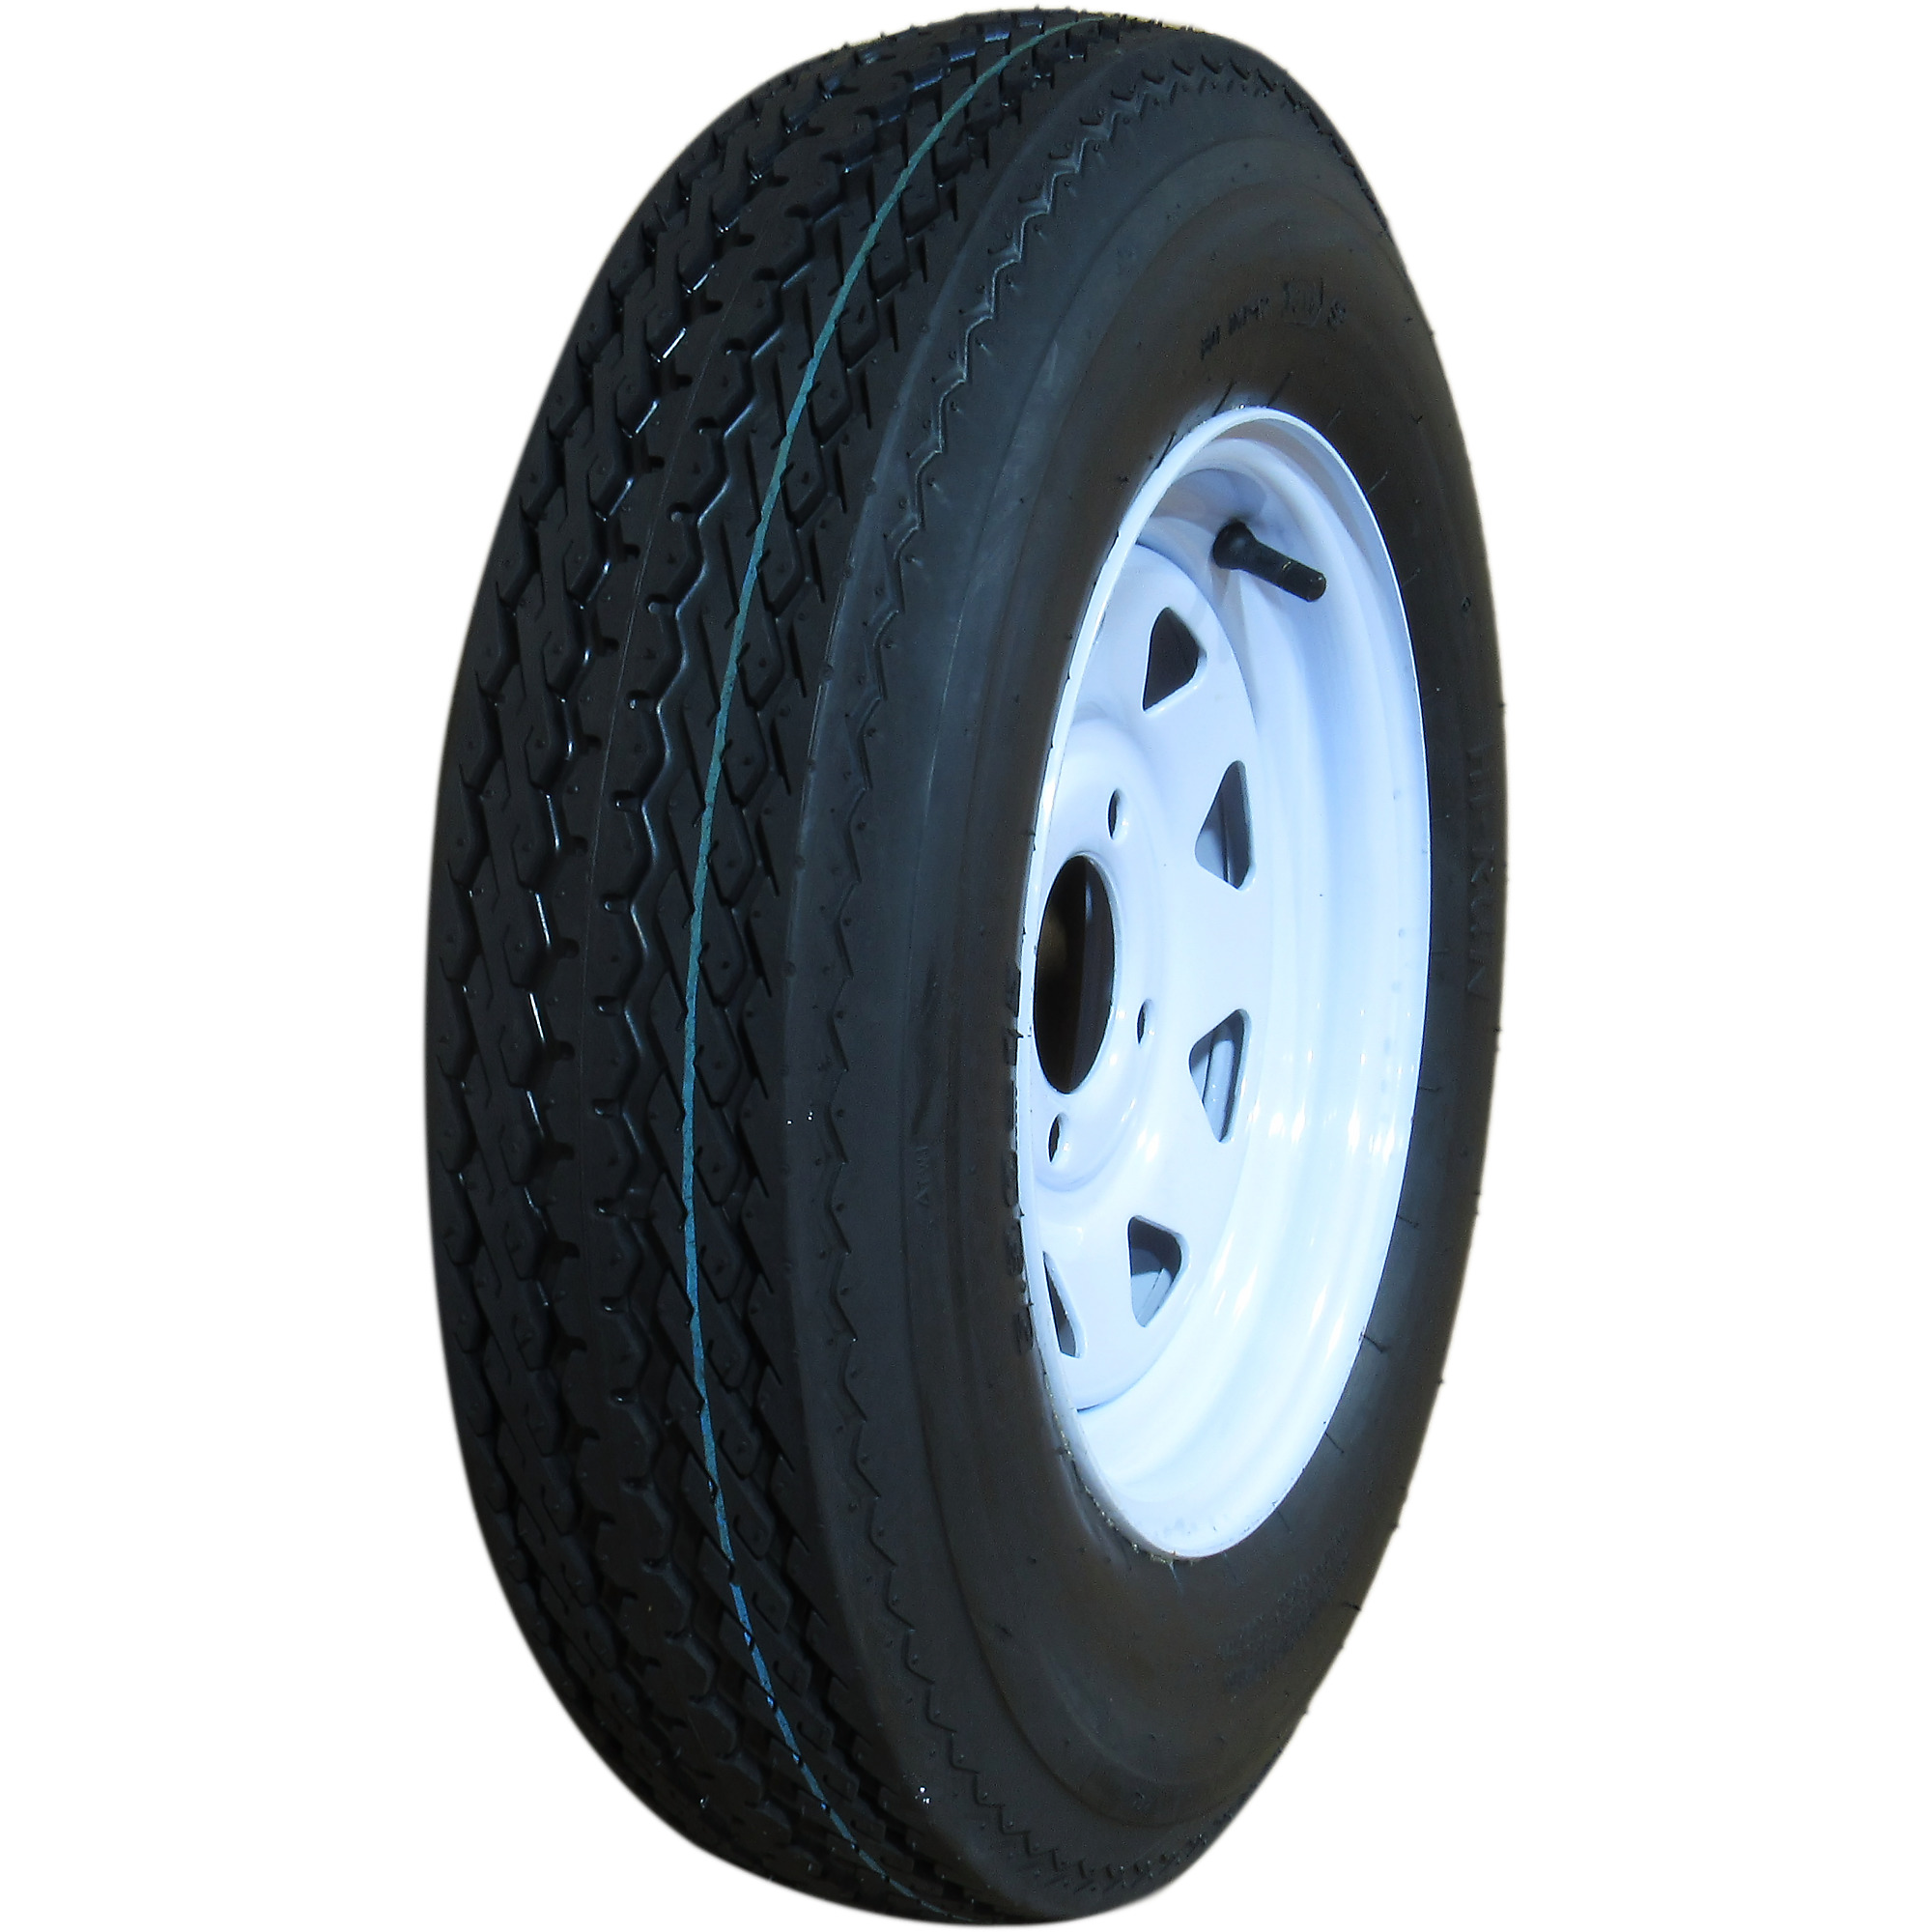 HI-RUN, Highway Trailer Tire Assembly, Bias-Ply, Tire Size 5.30-12 Load Range Rating C, Bolt Holes (qty.) 4 Model ASB1064